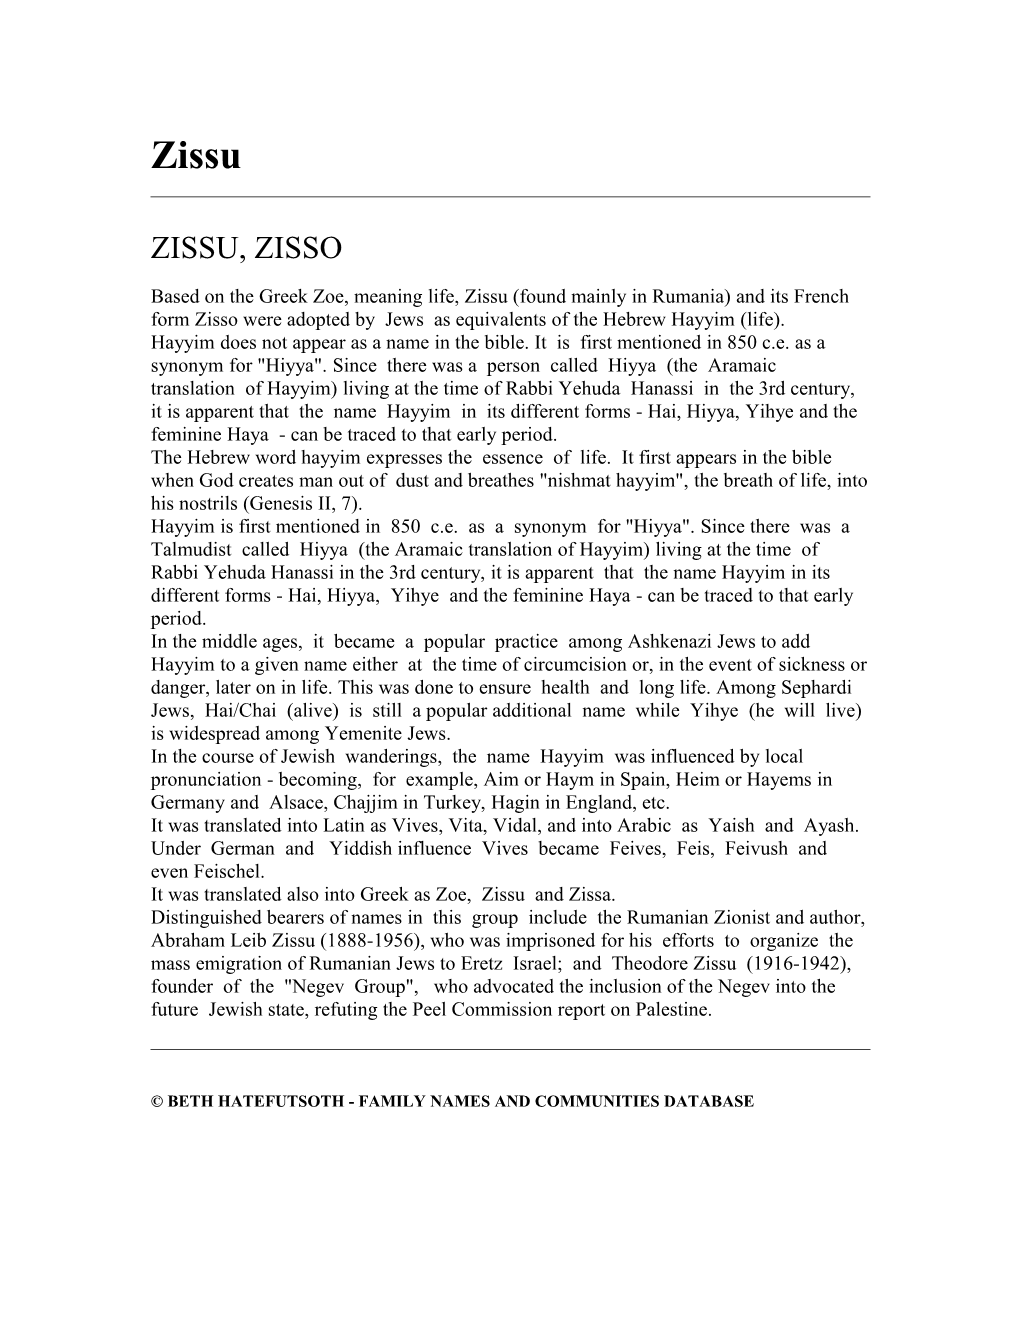 Based on the Greek Zoe, Meaning Life, Zissu (Found Mainly in Rumania) and Its French Form